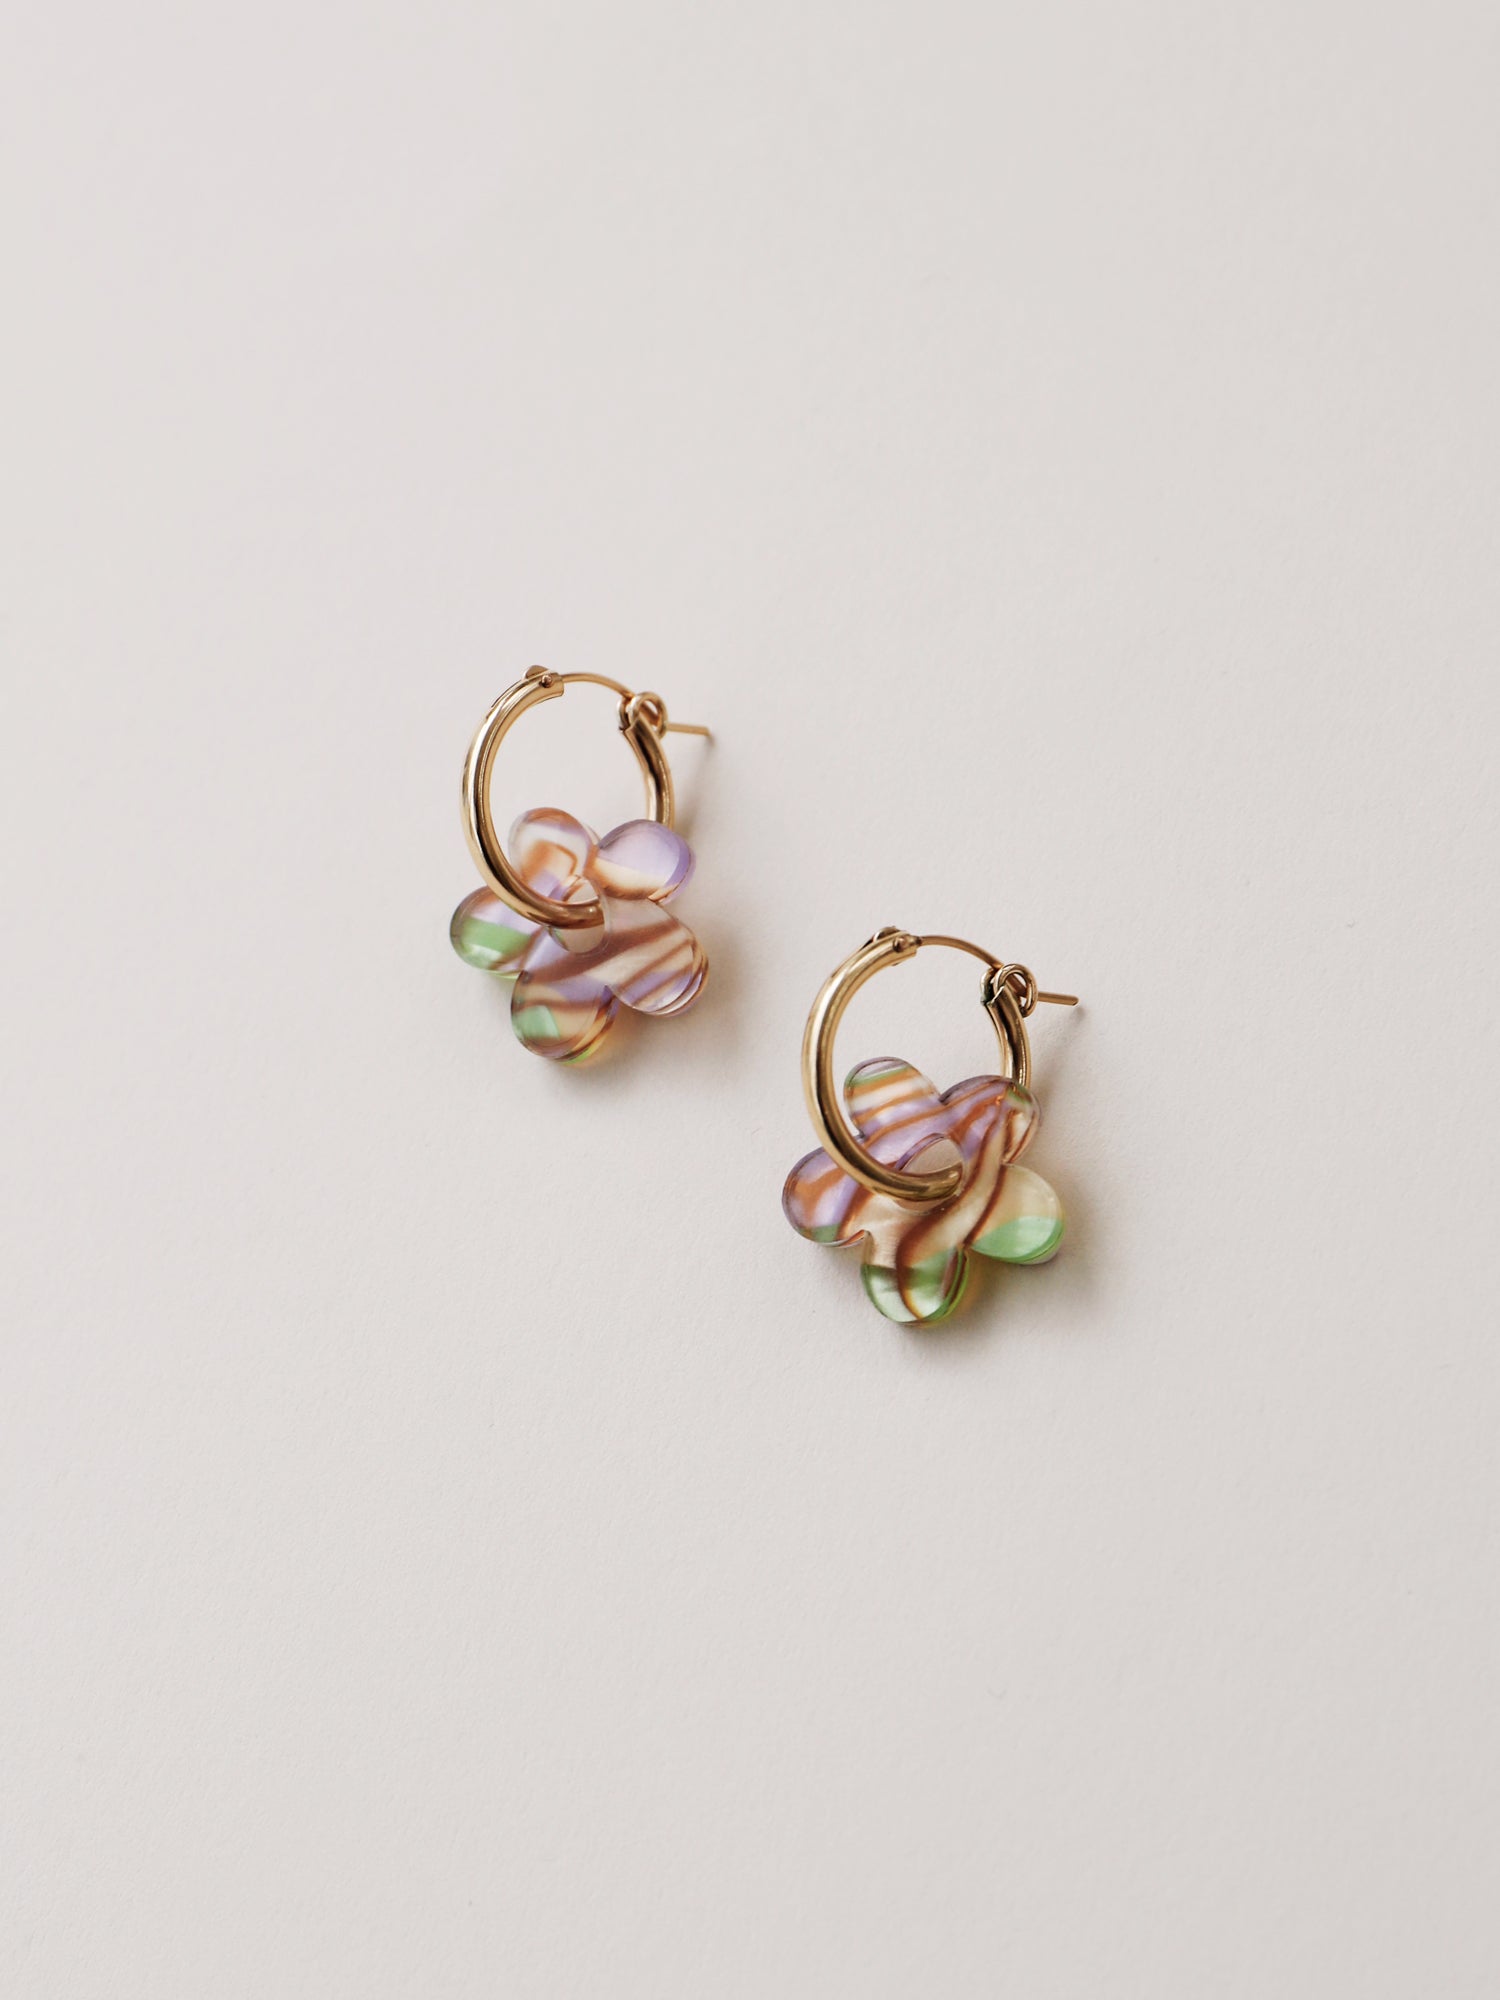 Flower charms in iridescent ripple. Made from our recycled acrylic. Paired with 14k gold-filled hoops. Handmade in the UK by Wolf & Moon.